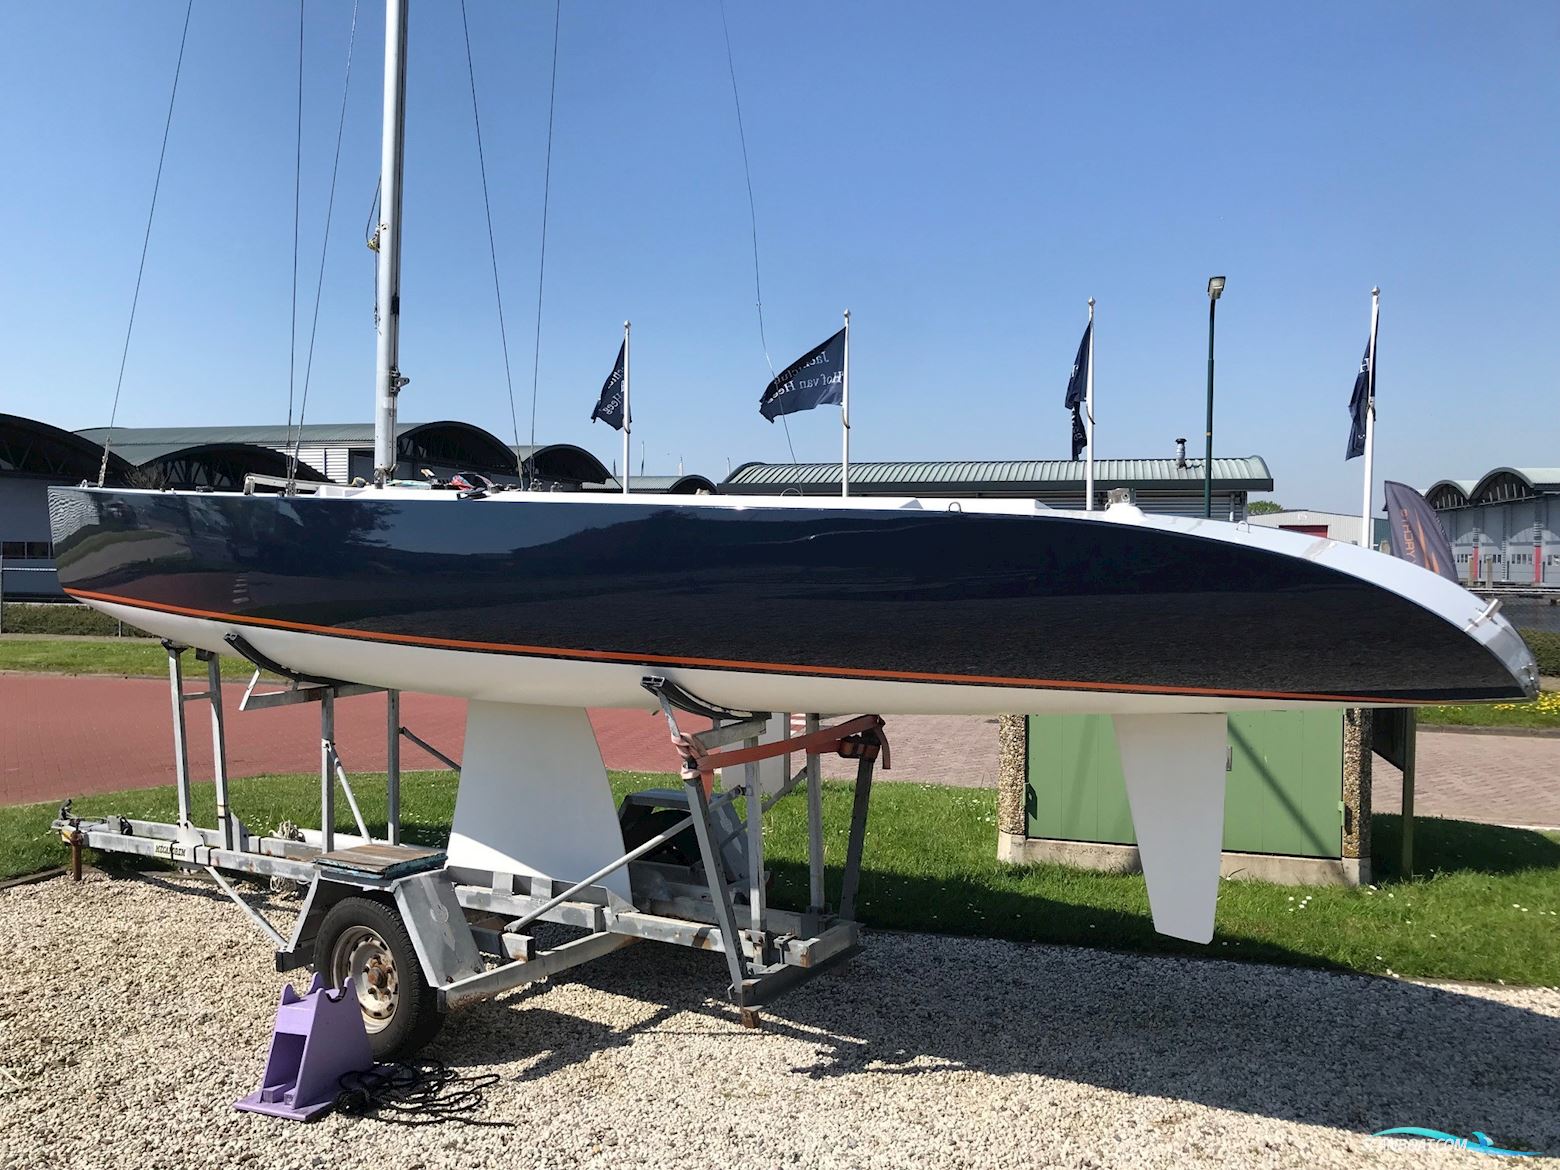 Mono Racer 750 Sailing boat 1989, The Netherlands